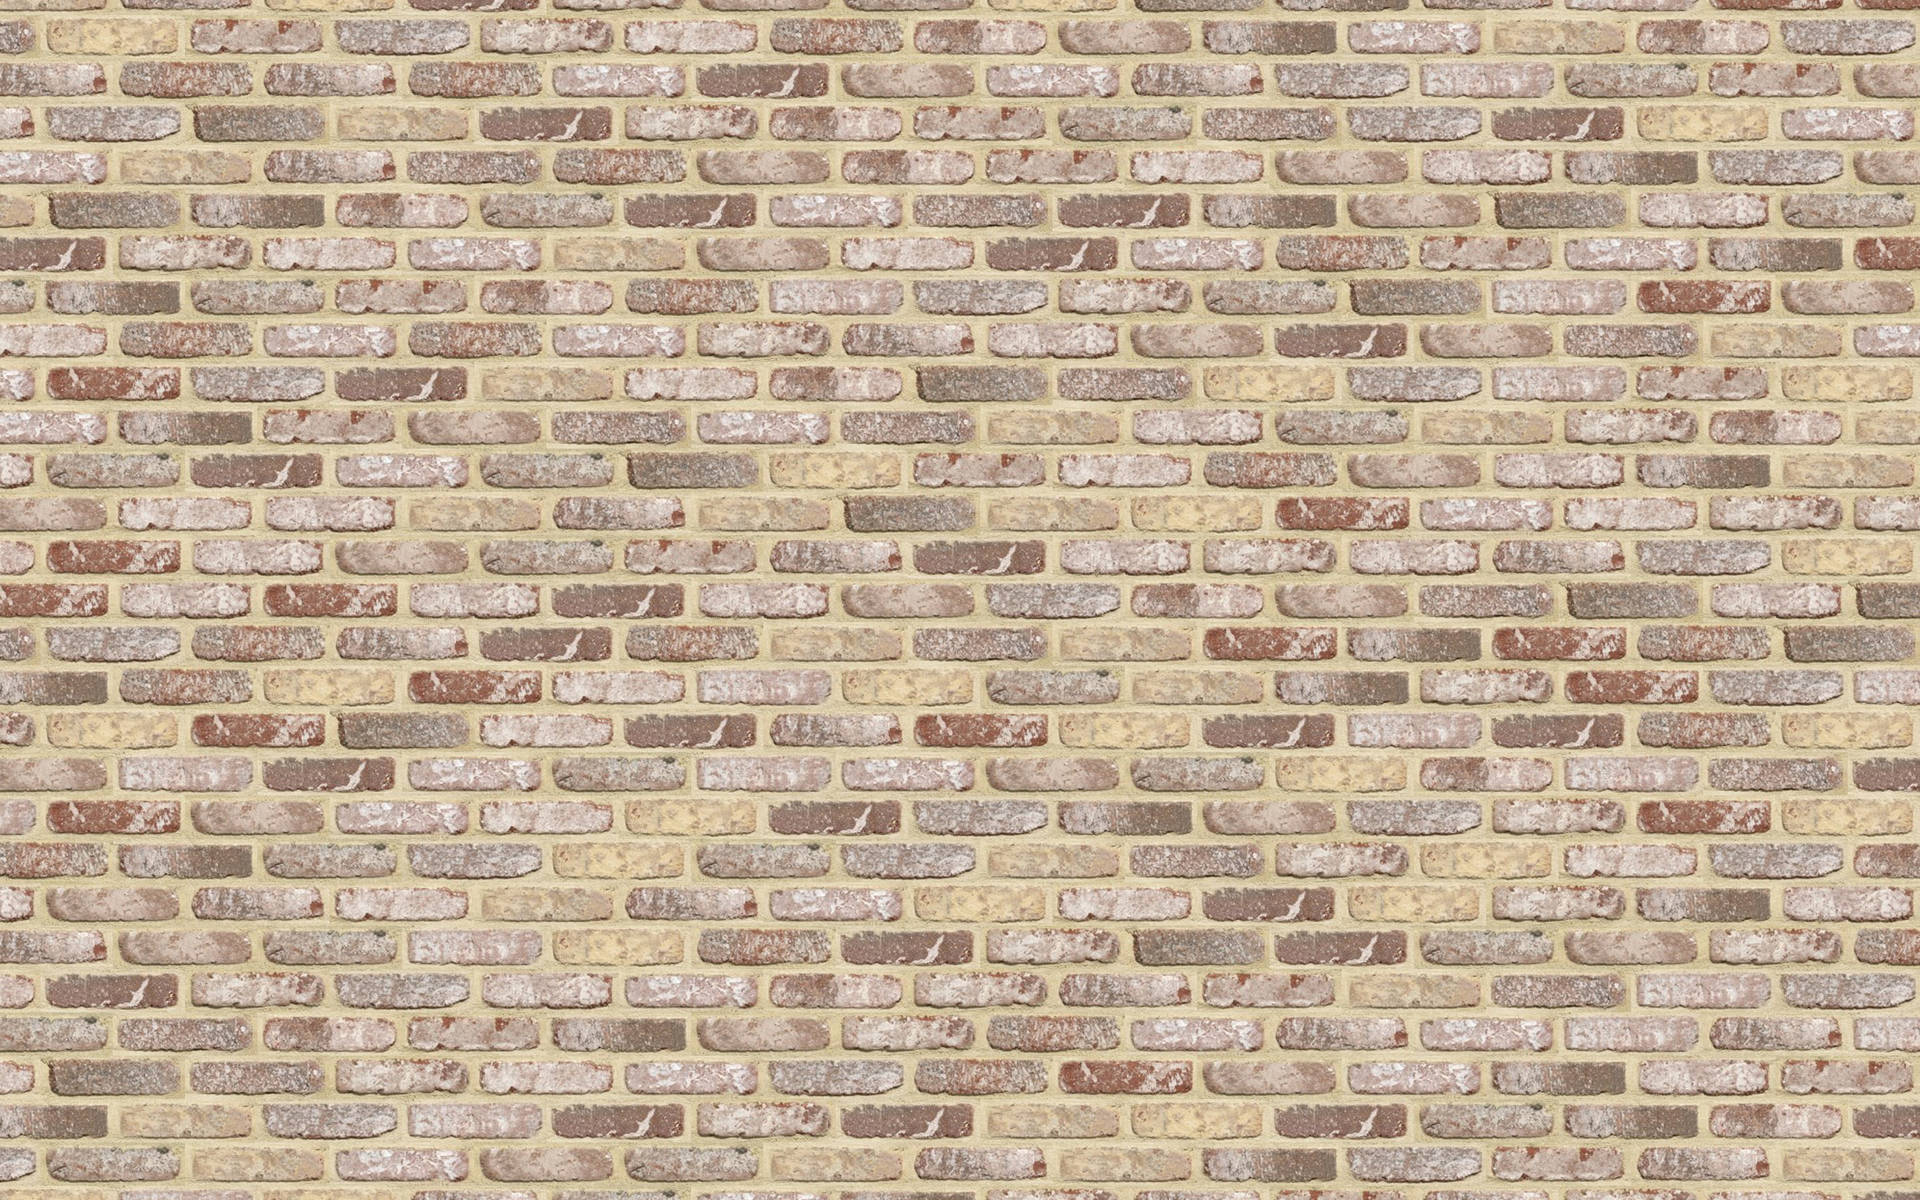 Light-colored Stone Wall With Bricks Background